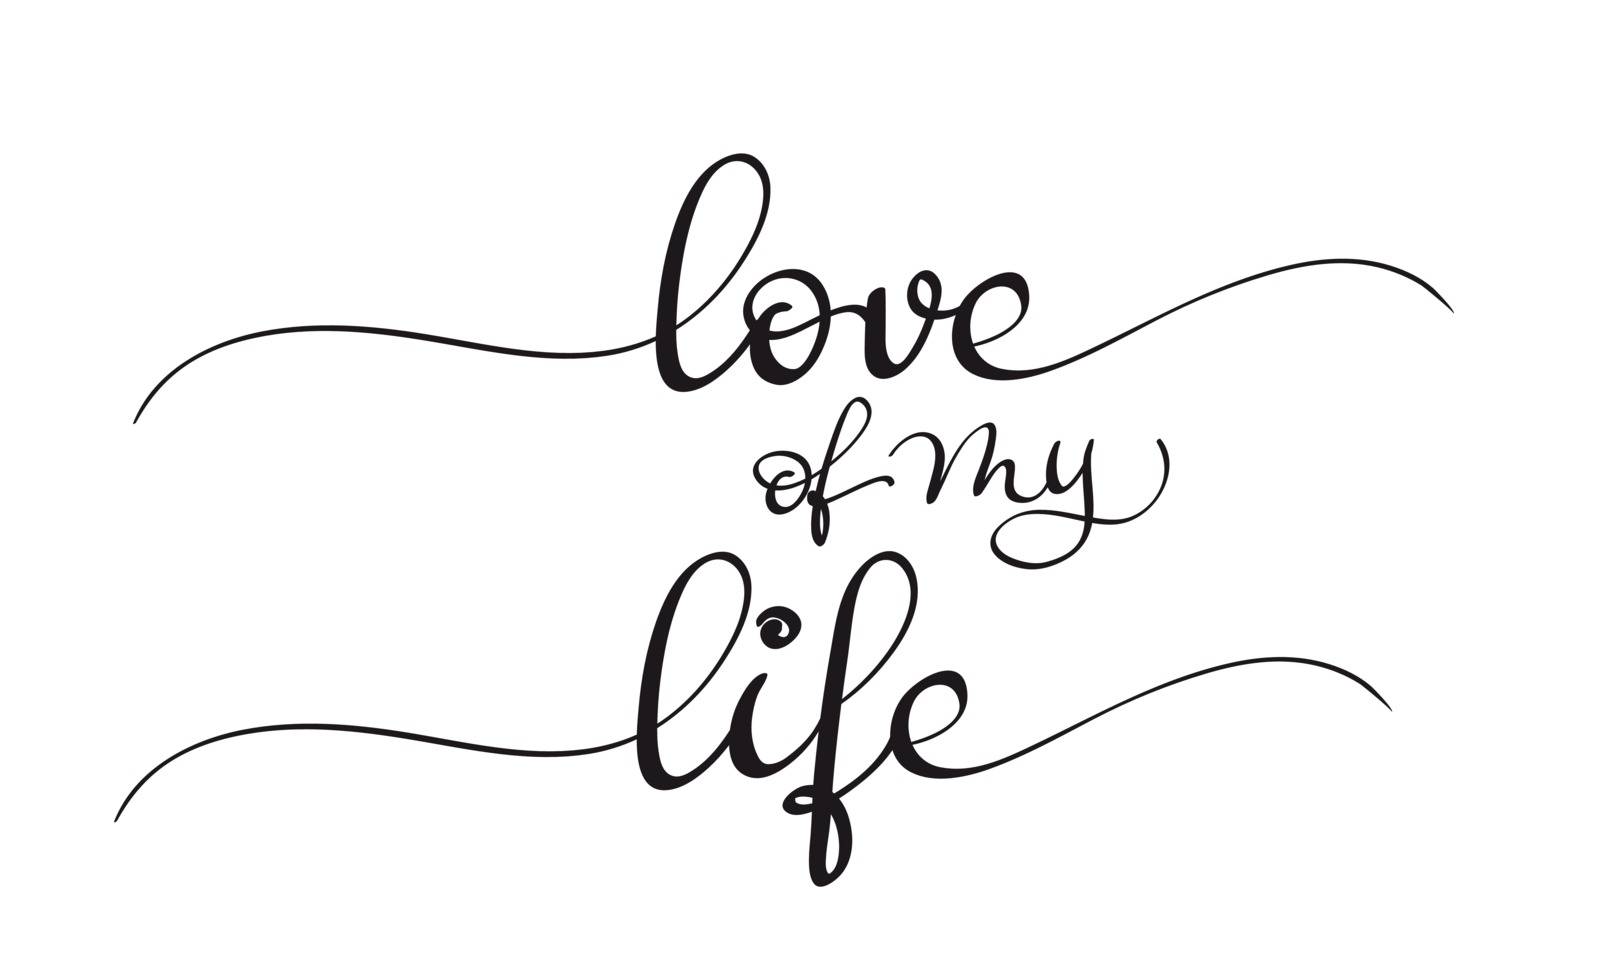 love of my life text on white background. Calligraphy lettering Vector illustration EPS10.